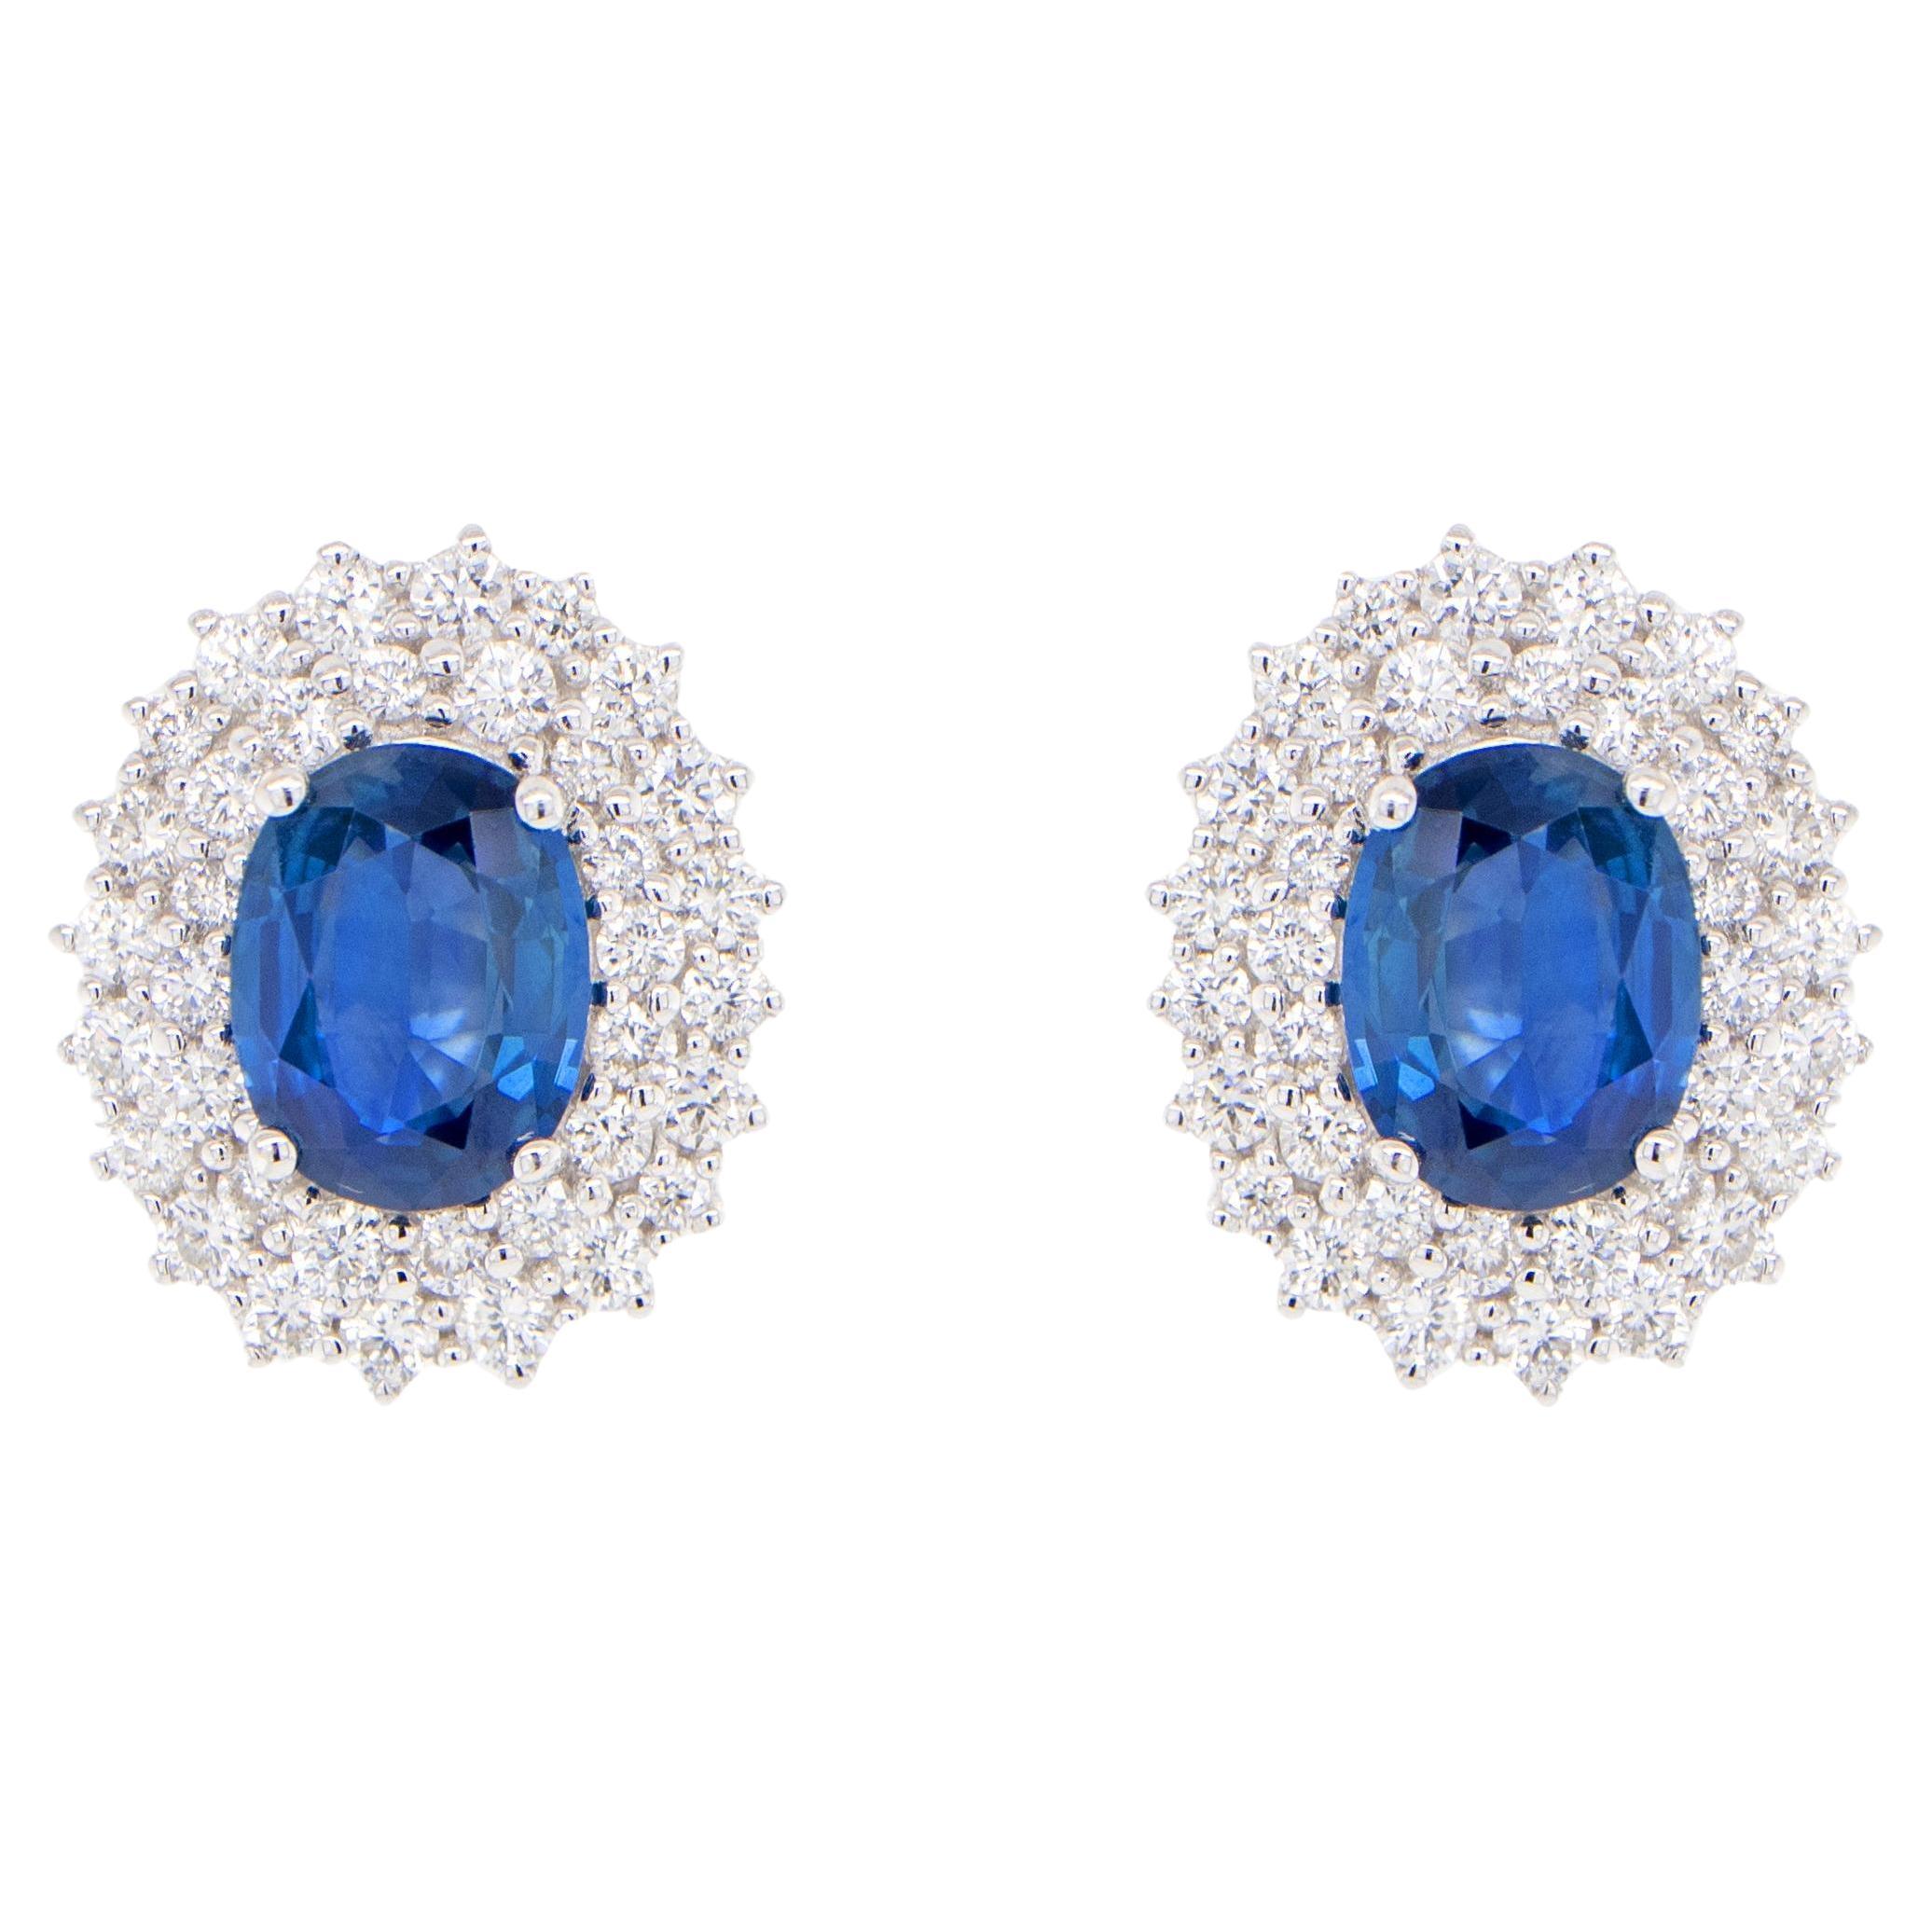 Blue Sapphire Earrings With Diamonds 3.82 Carats 18K Gold